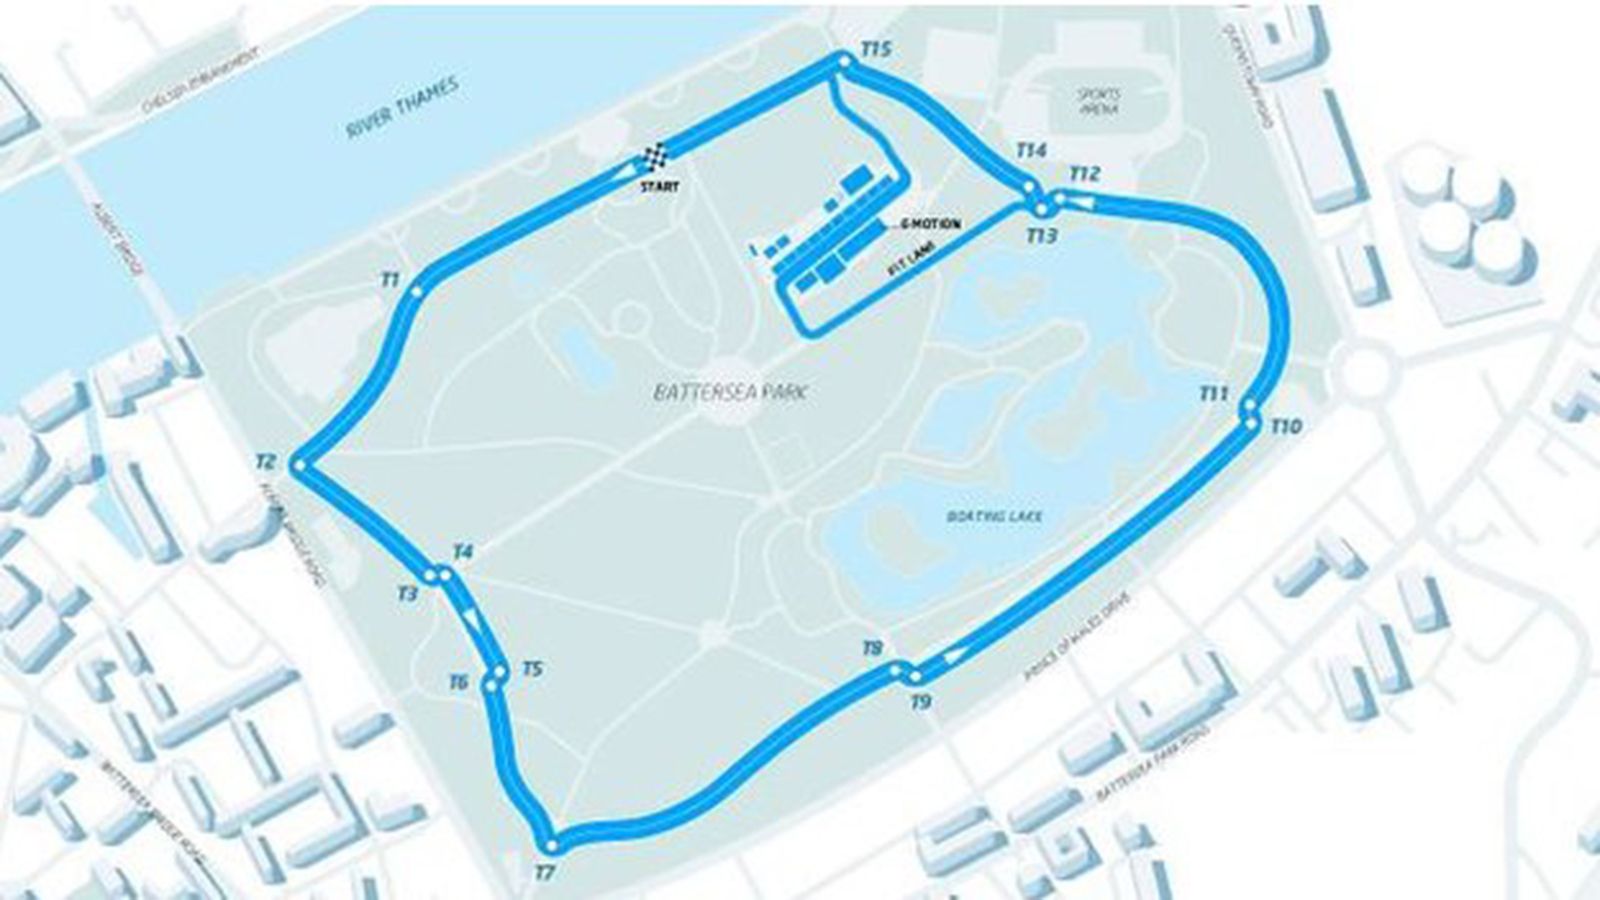 london formula e track revealed for two races in battersea park image 1